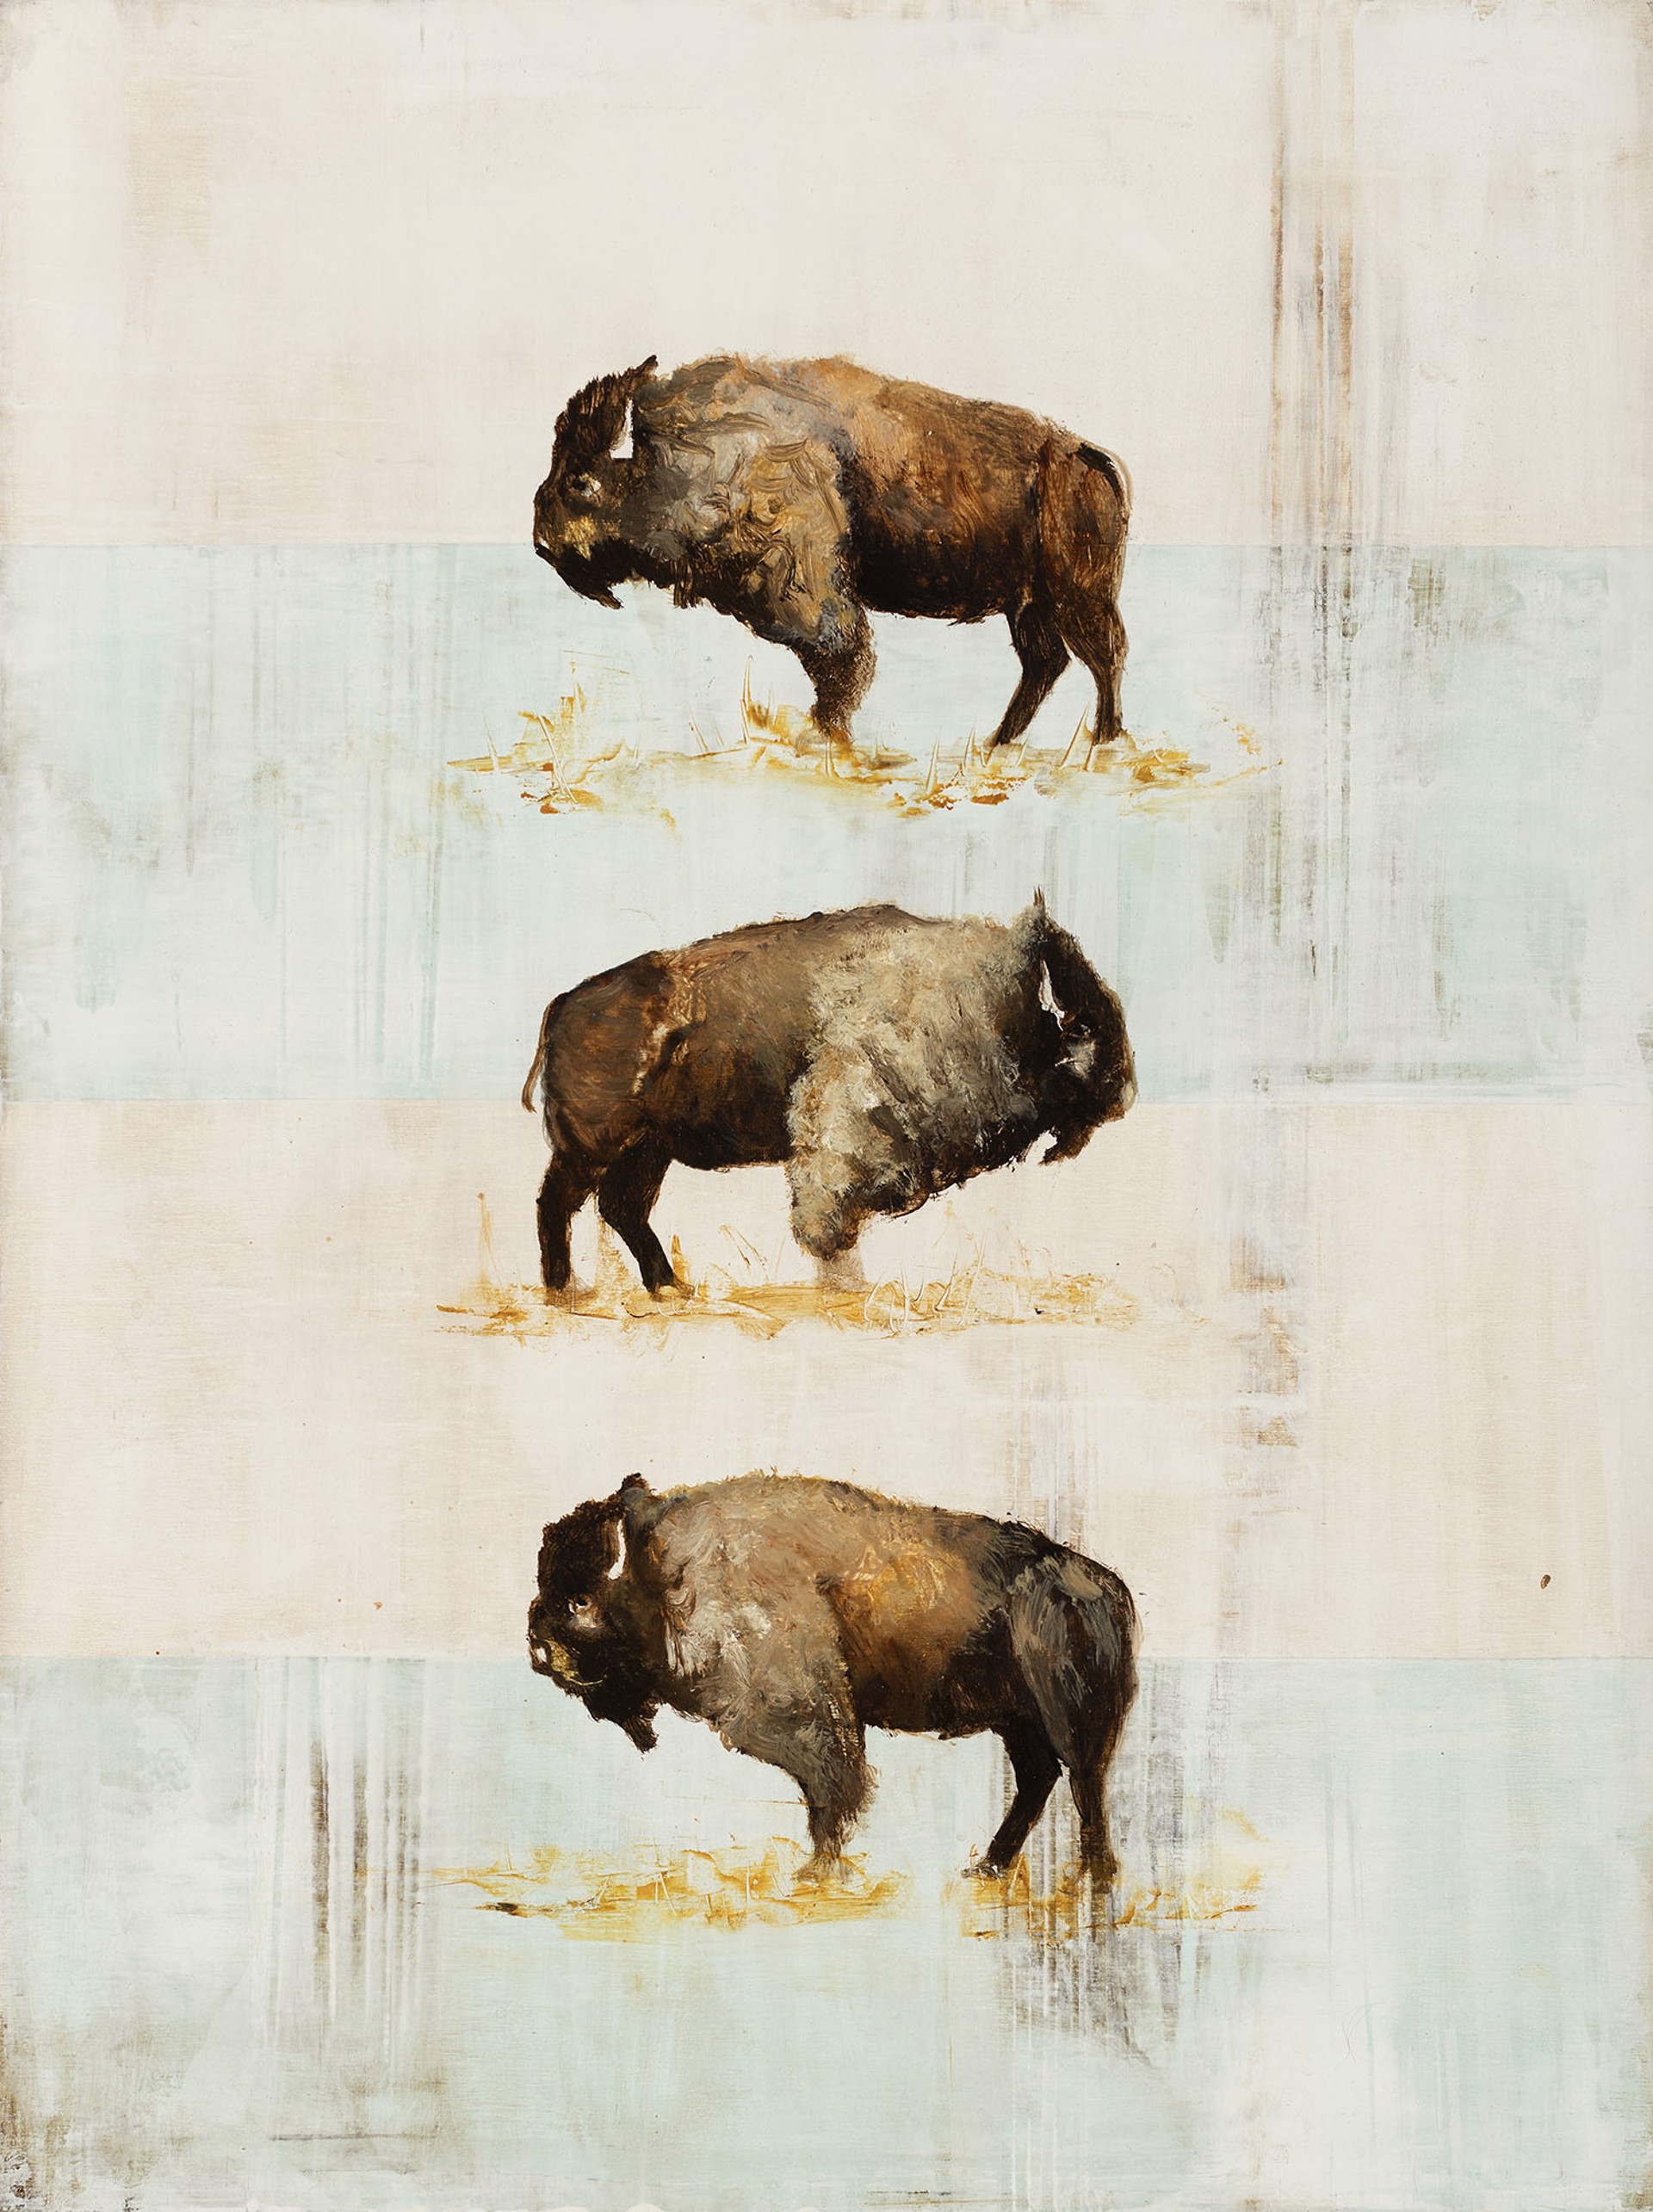 A Contemporary Painting Of Three Bison Standing With Stripes By Jenna Von Benedikt Available At Gallery Wild